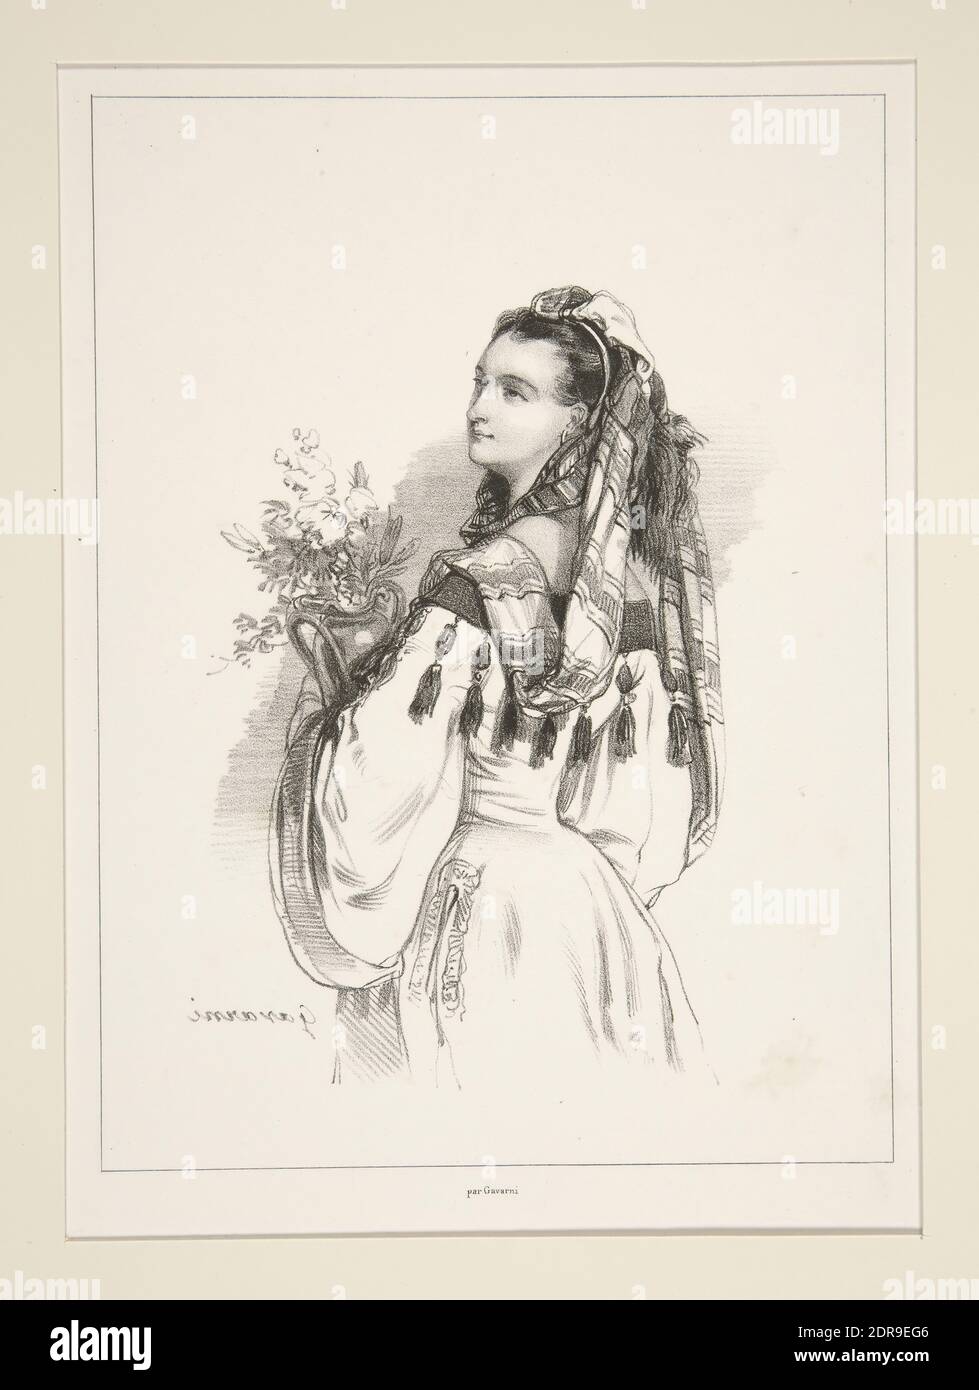 Artist: Paul Gavarni, French, 1804–1866, Fantasie, Lithograph, French, 19th century, Works on Paper - Prints Stock Photo